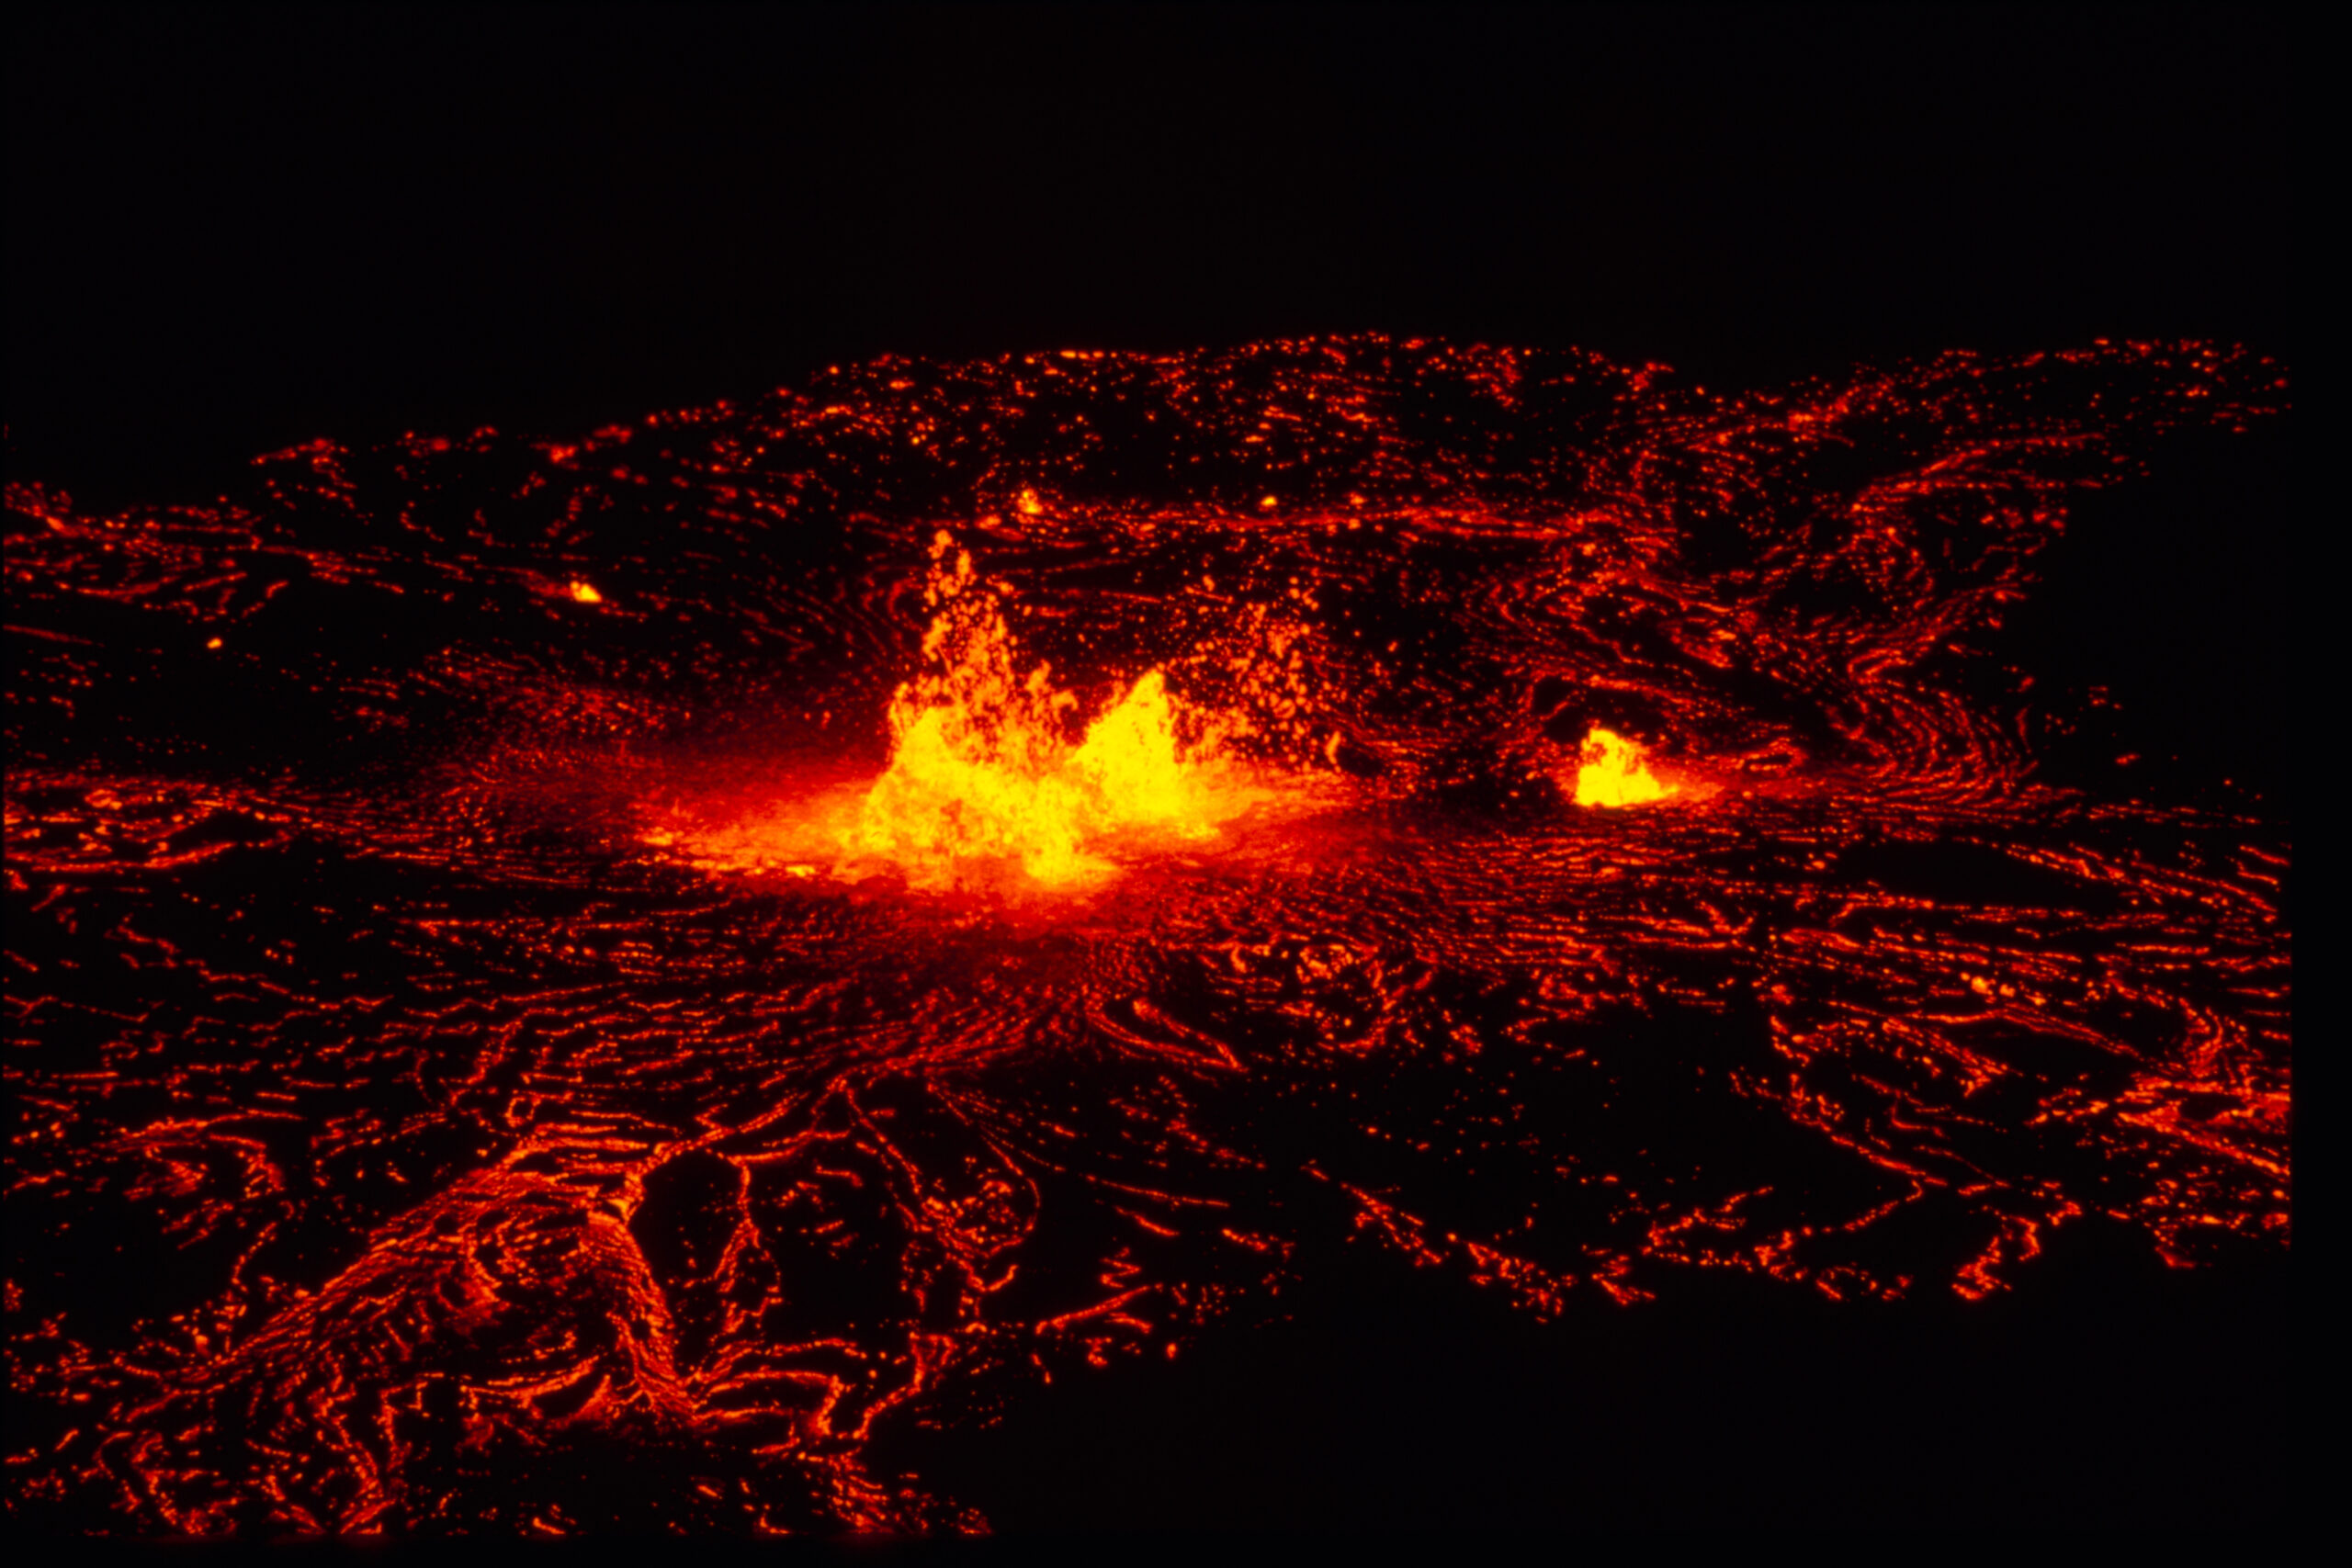 On a dark night, lava fountains up in three red-gold sprays.  A network of lacelike glowing lava strands surrounds the fountains on all sides, outlining the contours of the earth beneath. 